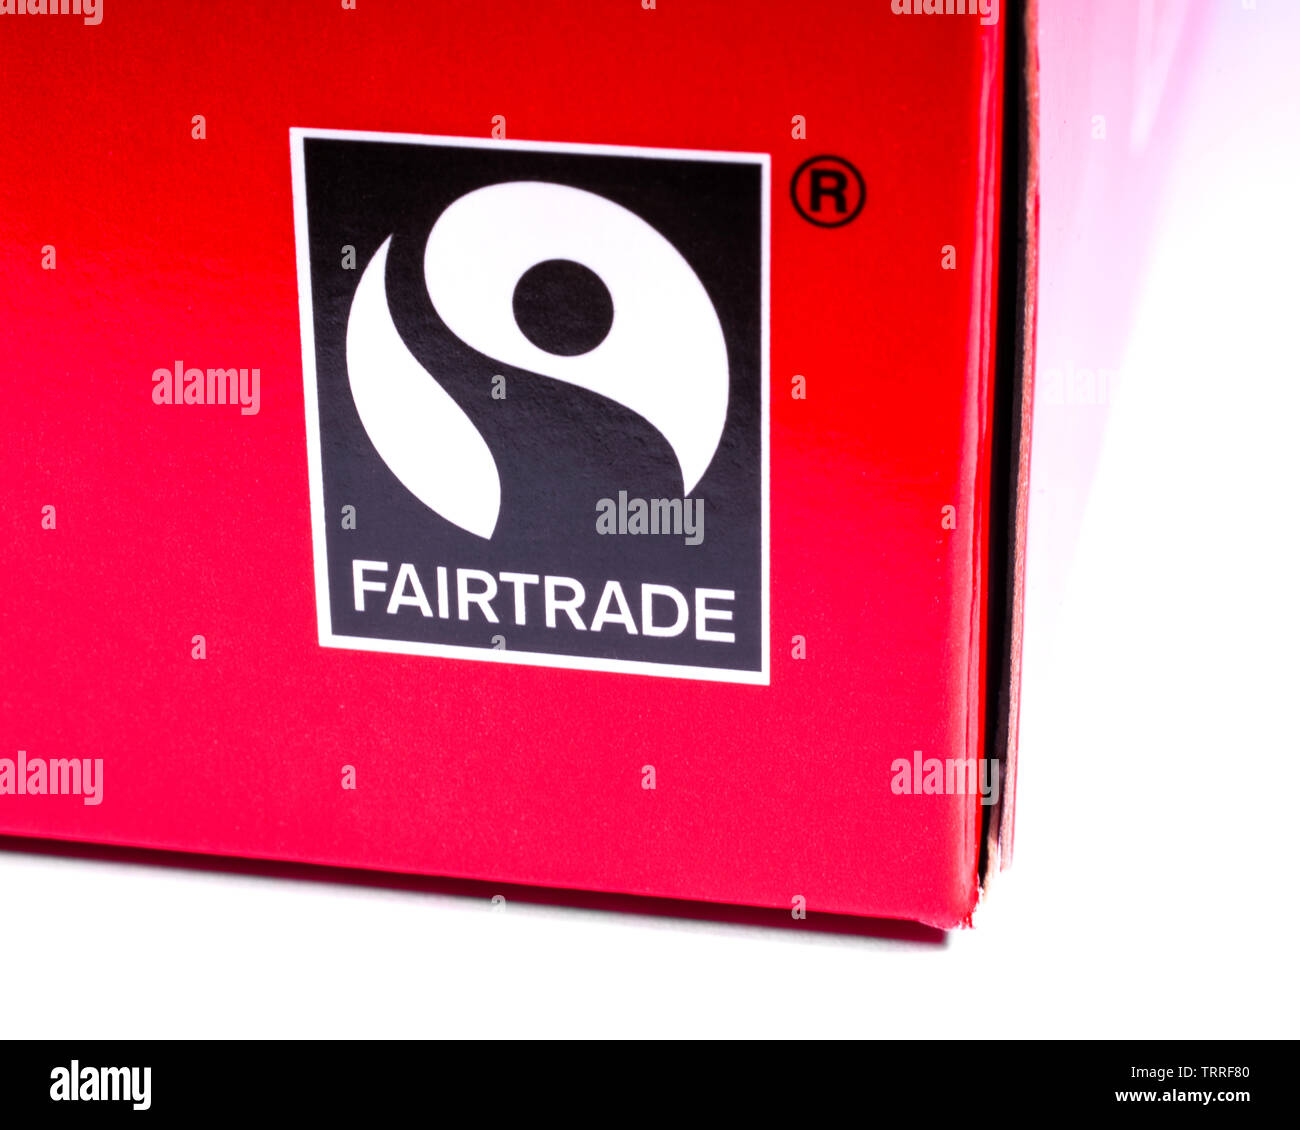 London, UK - June 11th 2019: A close-up of the Fairtrade Certification Symbol on the packaging of a food product. Stock Photo